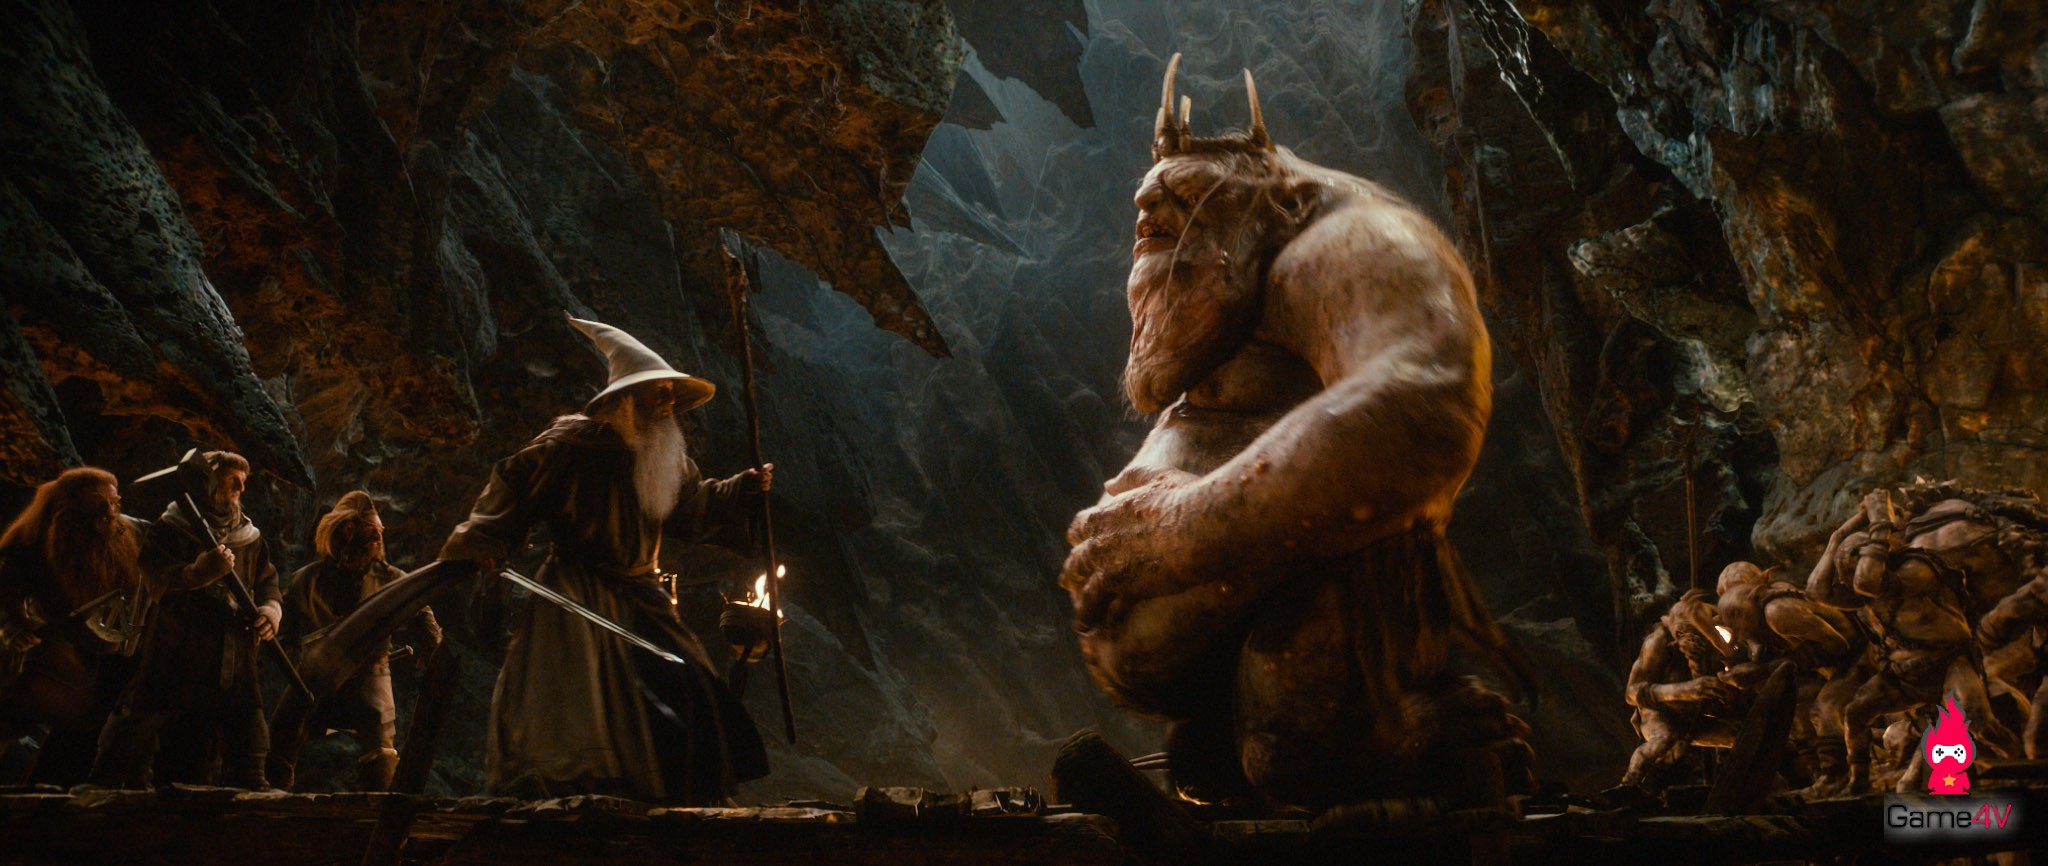 (L-r) PETER HAMBLETON as Gloin, Adam Brown as Ori, Jed Brophy as Nori, IAN McKELLEN (center) as Gandalf and the Great Goblin, performed by BARRY HUMPHRIES in the fantasy adventure “THE HOBBIT: AN UNEXPECTED JOURNEY,” a production of New Line Cinema and Metro-Goldwyn-Mayer Pictures (MGM), released by Warner Bros. Pictures and MGM.